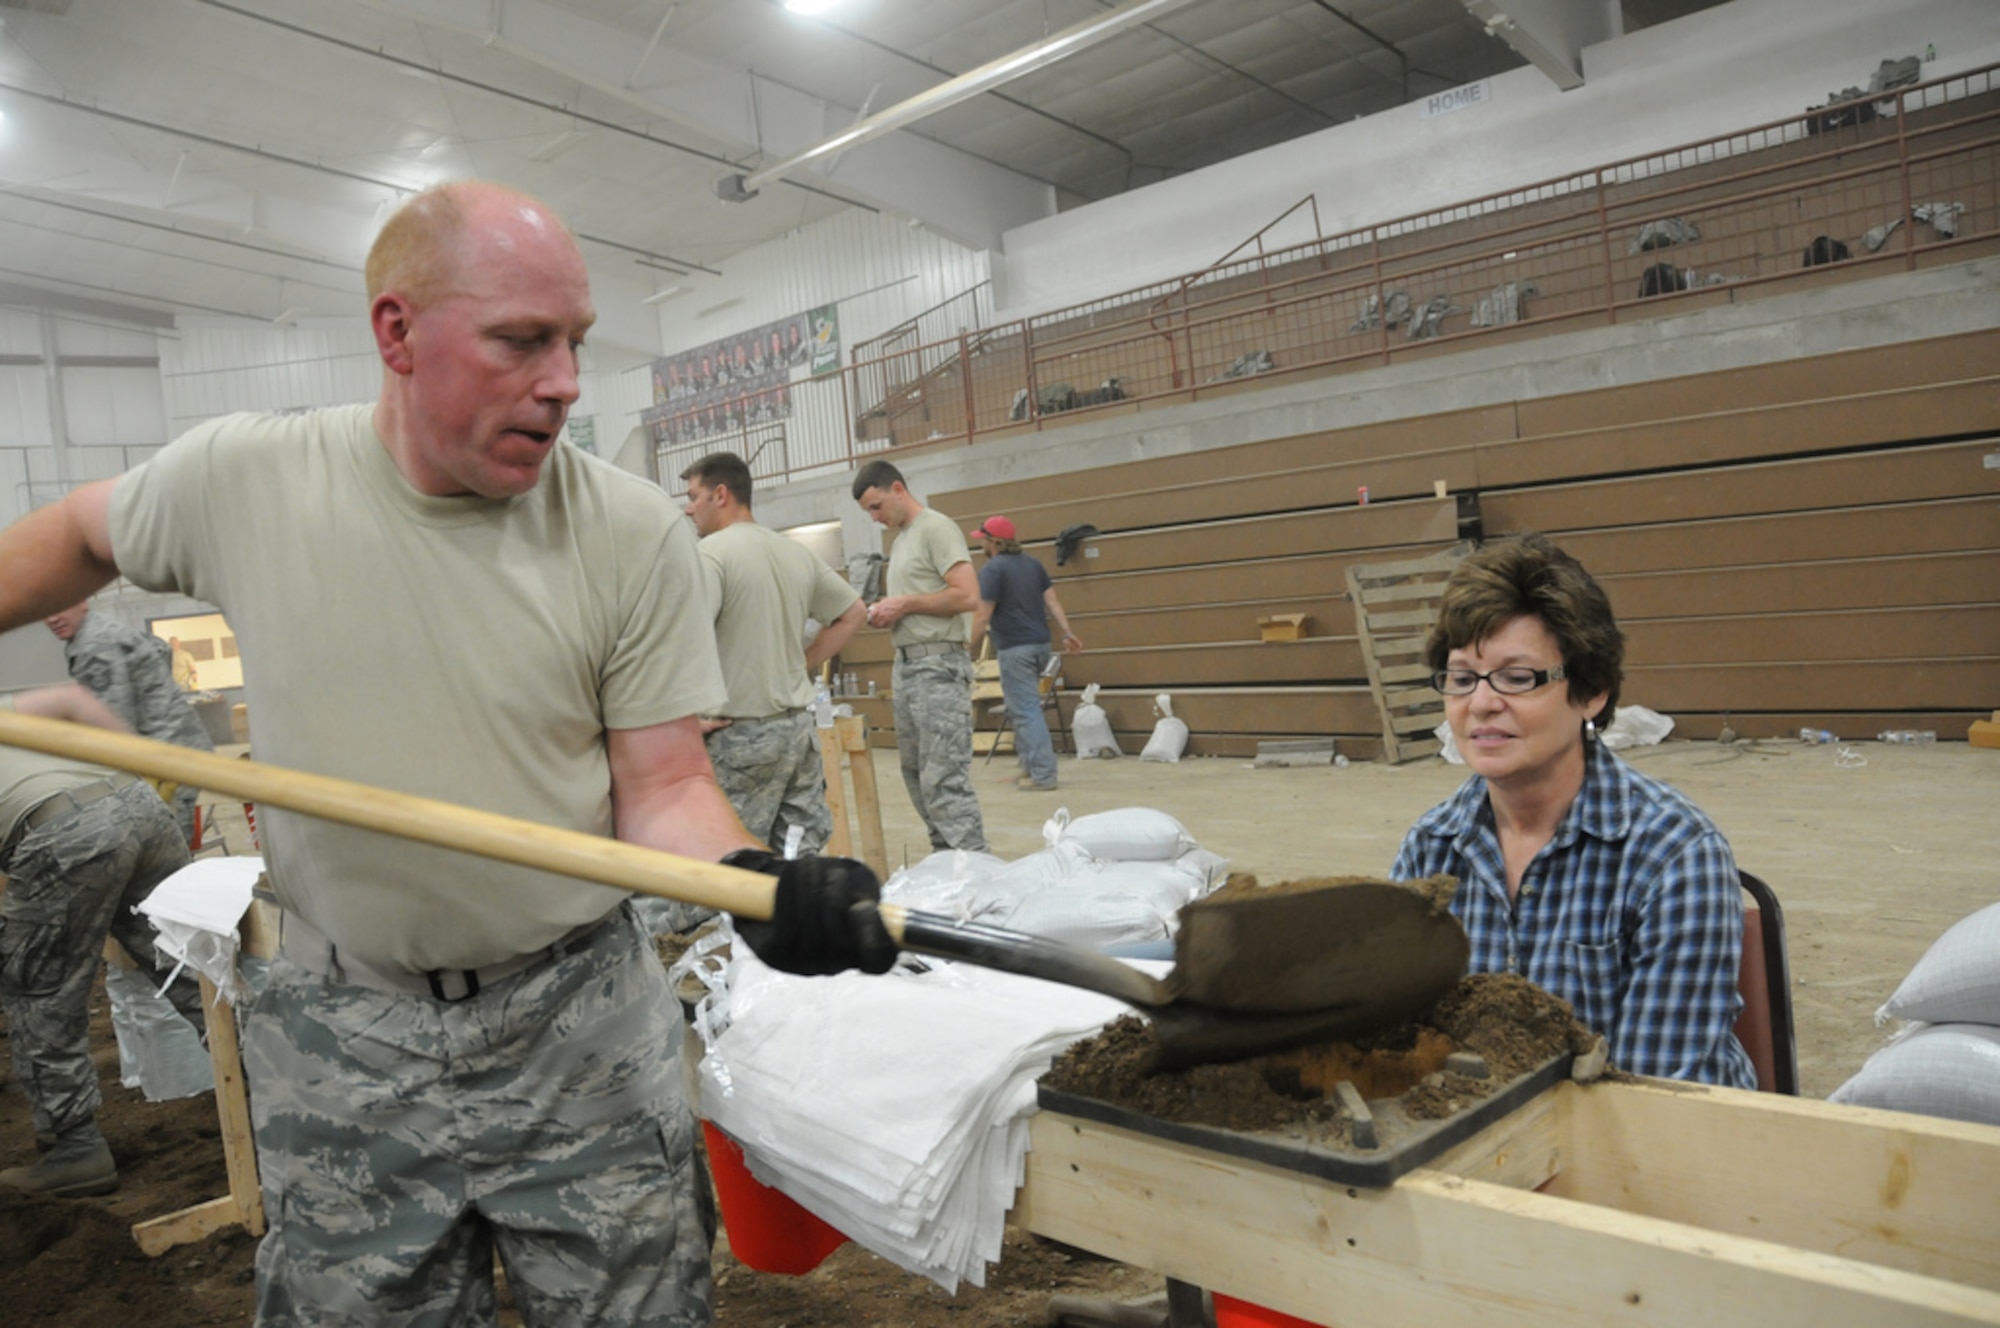 FT. PIERRE, S.D. -- Capt. Kevin Miller, Budget Officer for the 114th Financial Management Flight, works with Donna Brown-Glow, a Wood, S.D. and Ft. Pierre resident to fill sandbags late into the evening on May 31. Brown-Glow's home has not been threatened by the flooding, but feels it's important to help others throughout the state.(Photo by Capt. Michael Frye, 114th Fighter Wing Public Affairs Officer) (RELEASED)
